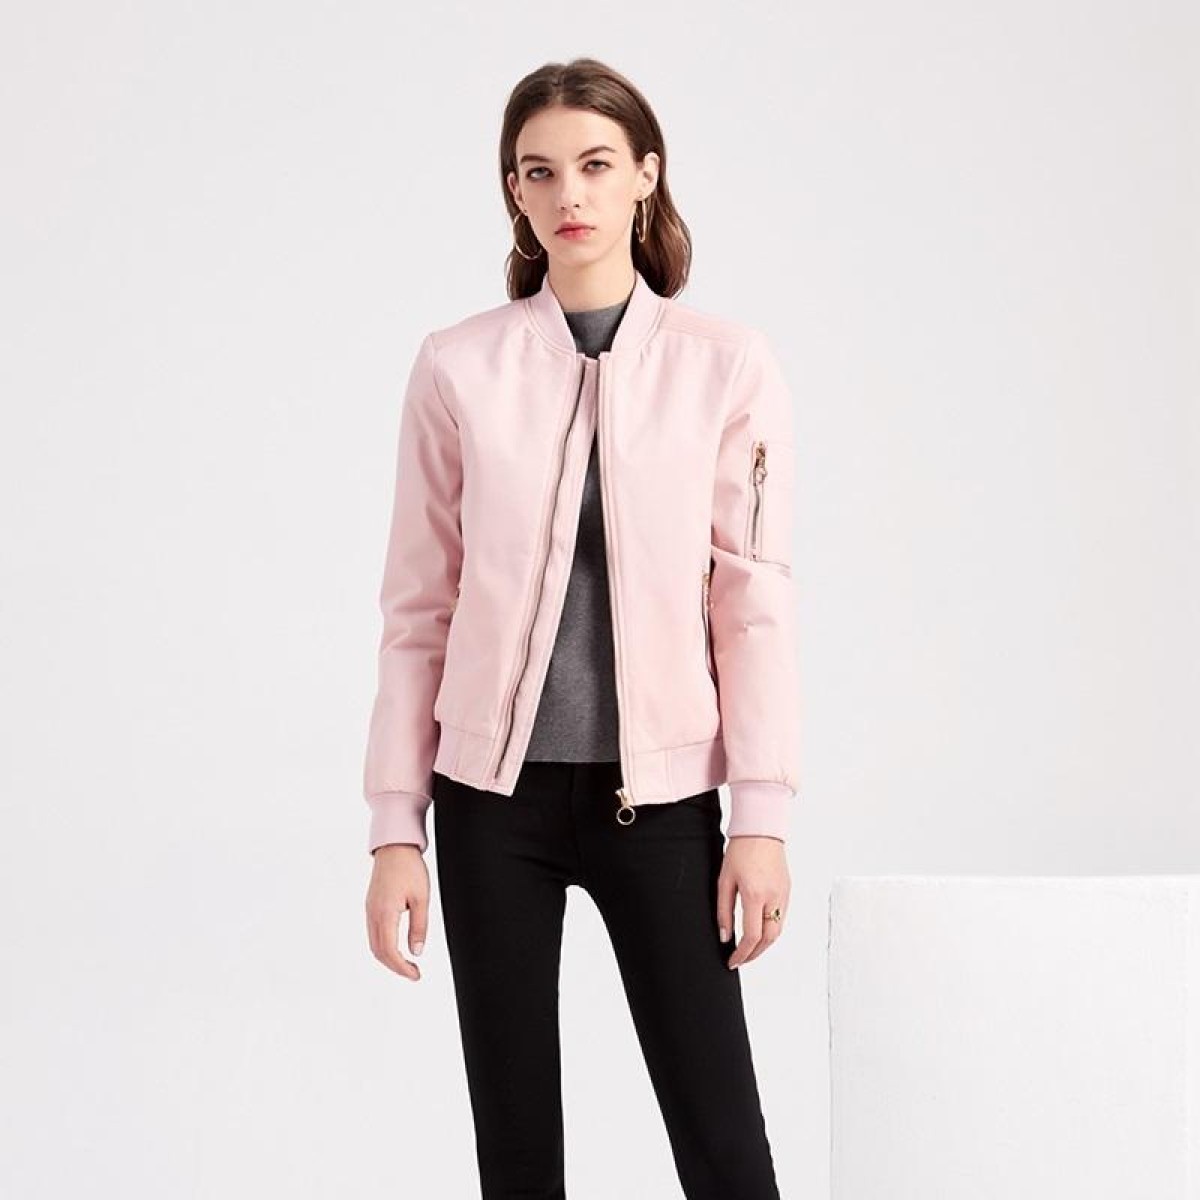 Autumn And Winter Thin Cotton Zipper Jacket Casual Coat For Women (Color:Pink Size:XL)